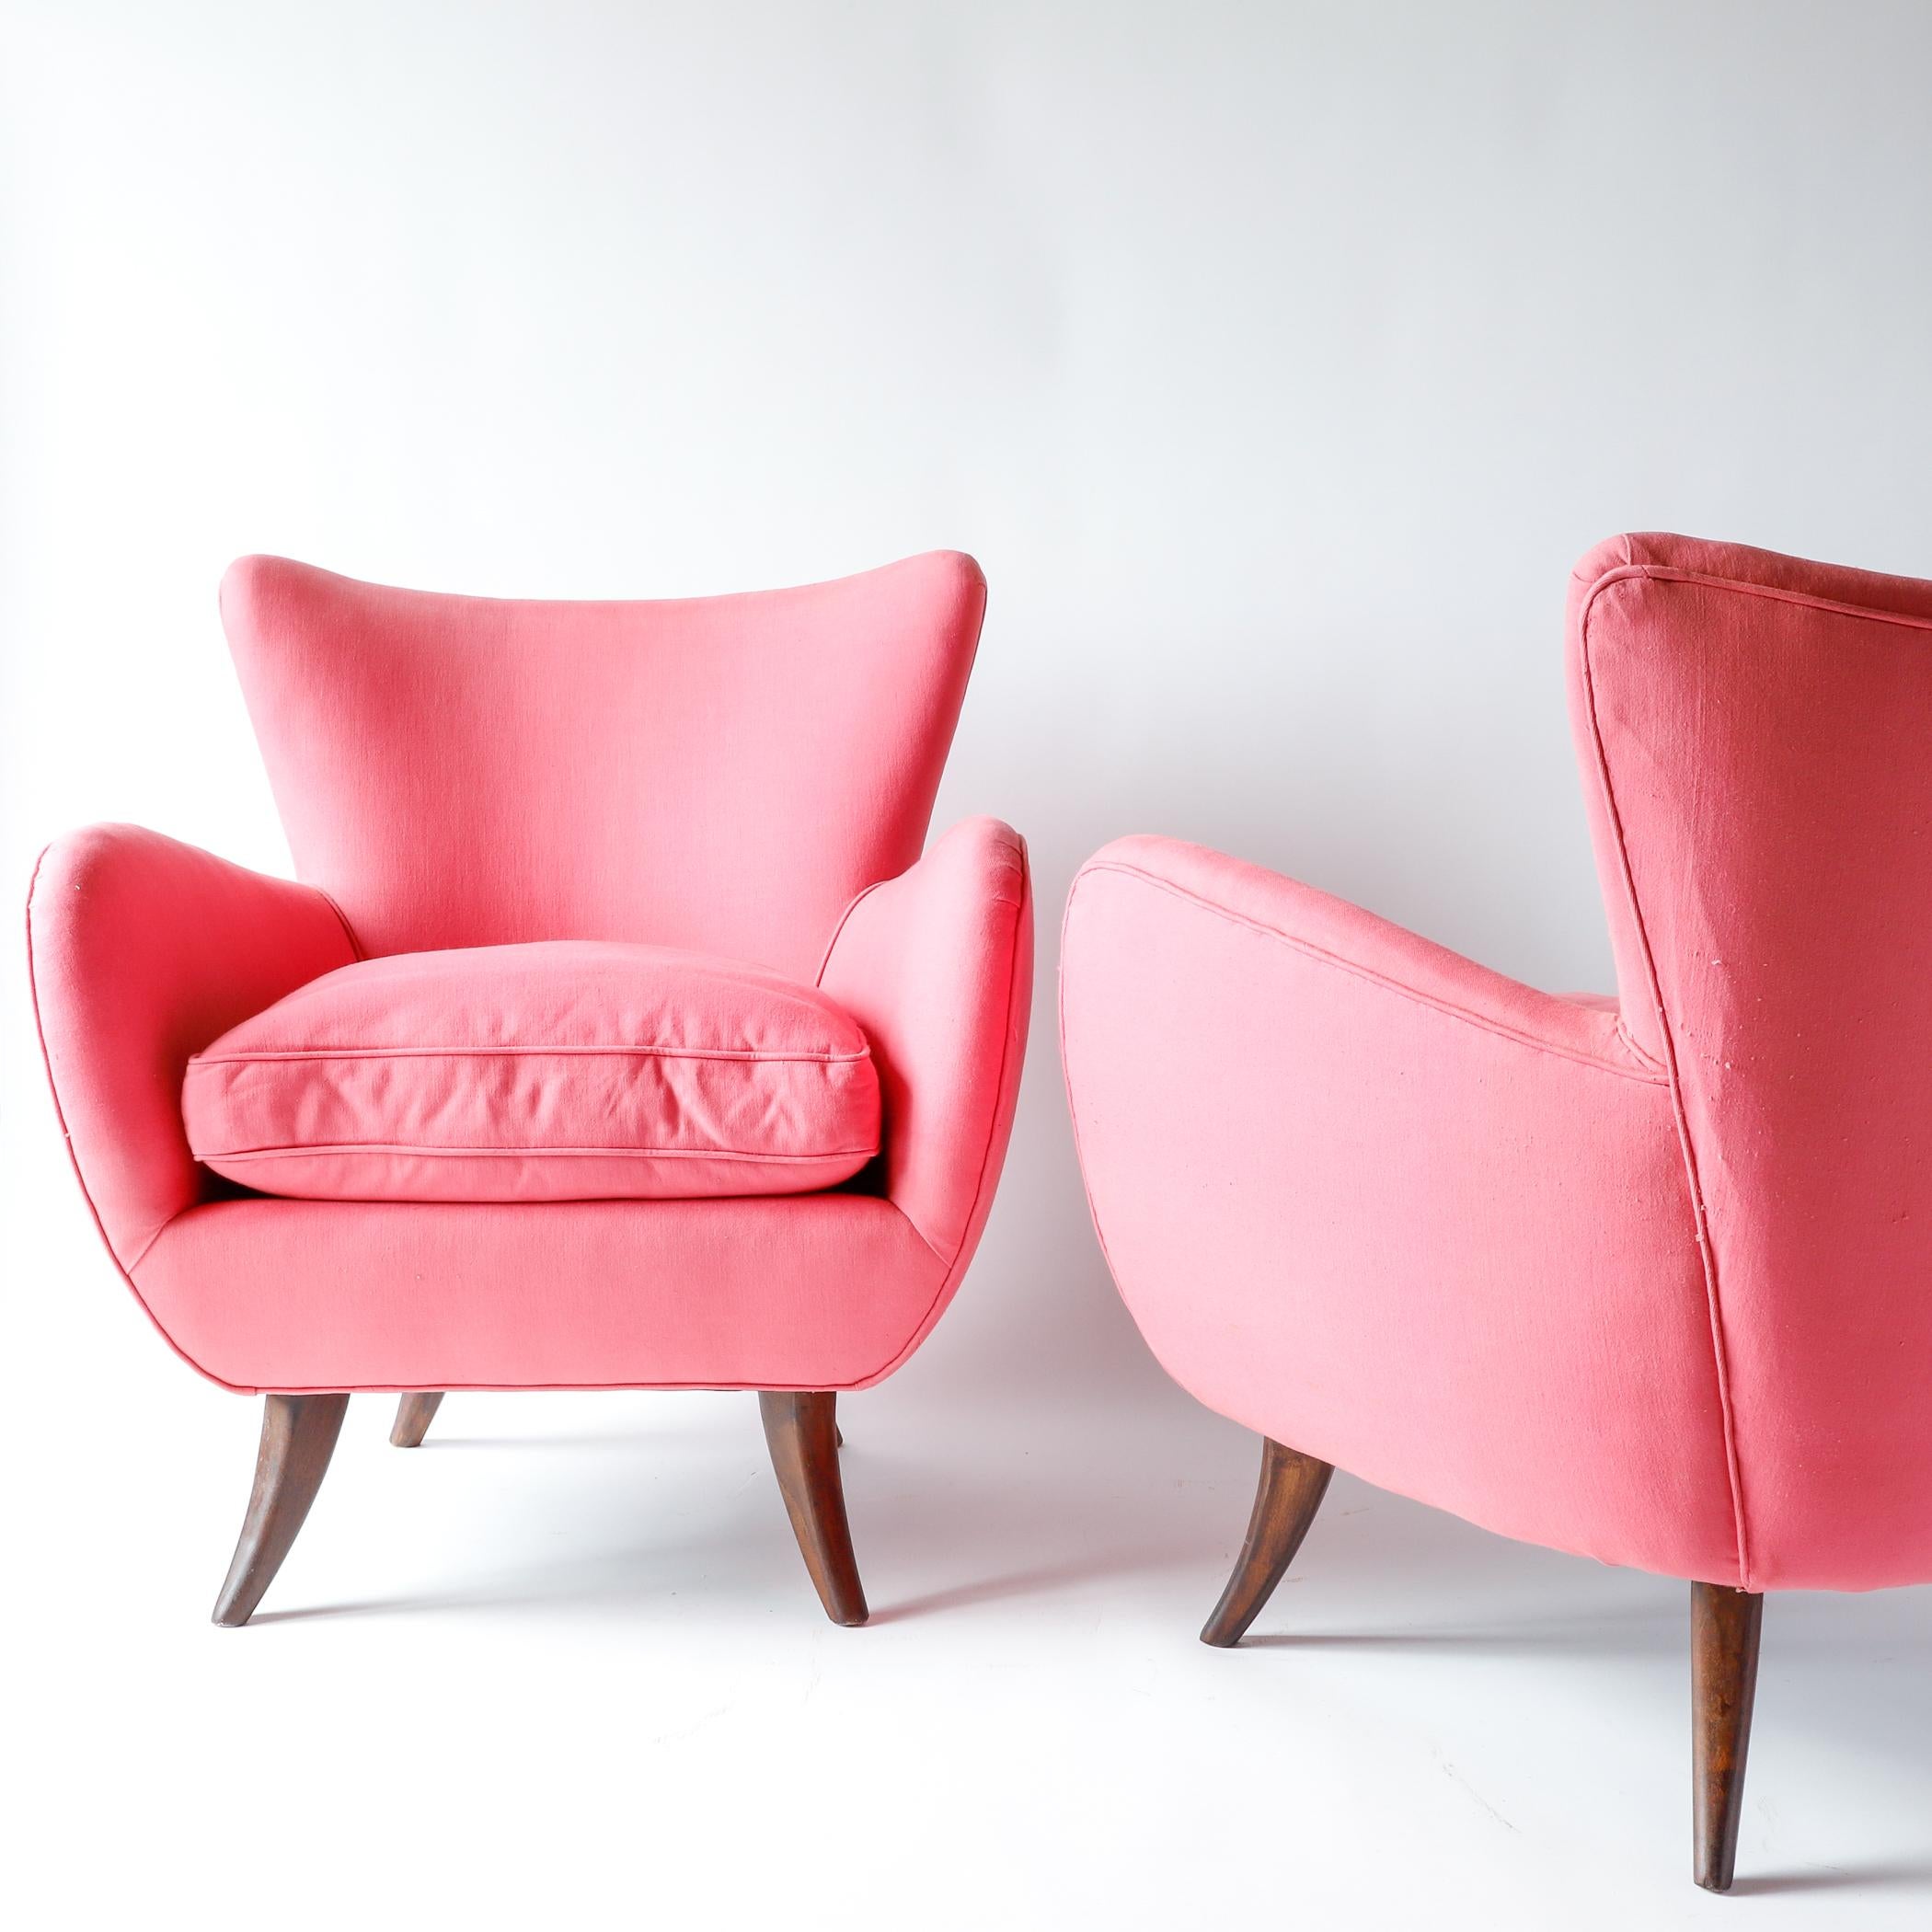 Cotton Pair of Ernst Schwadron Upholstered Lounge Chairs, 1940s, Bright Pink For Sale